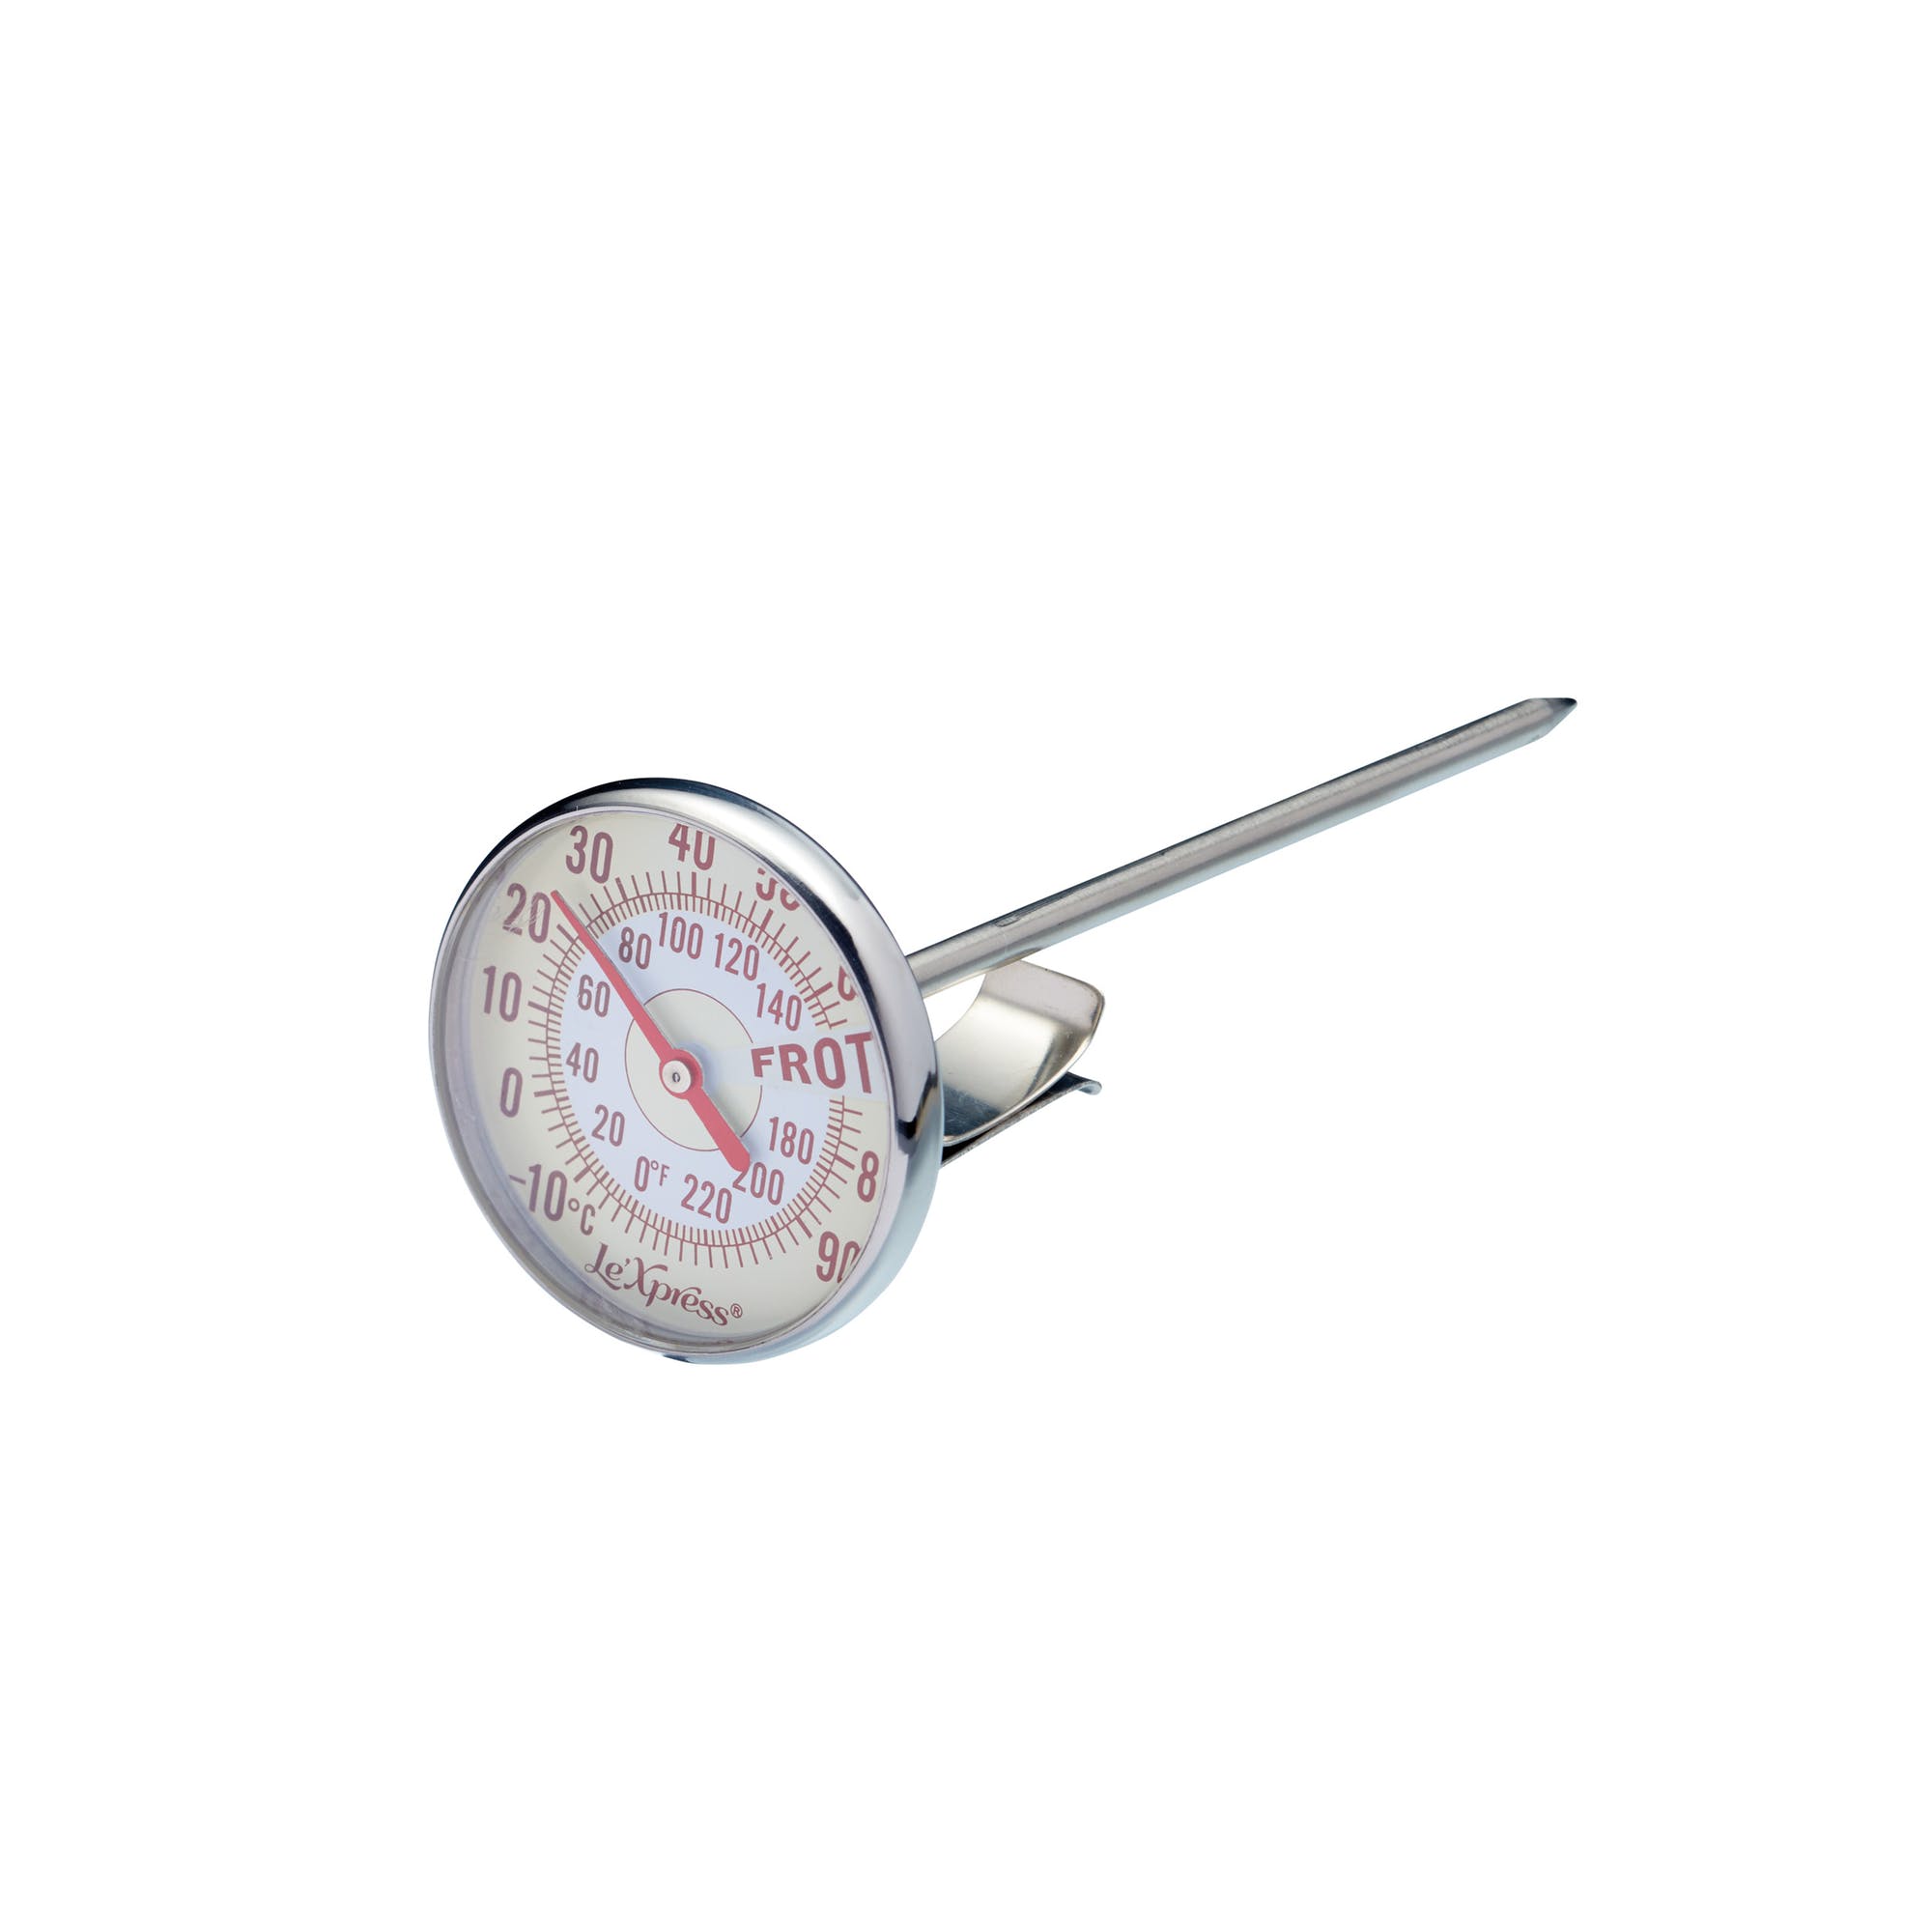 Le'Xpress Stainless Steel Steamed Milk Thermometer - The Cooks Cupboard Ltd